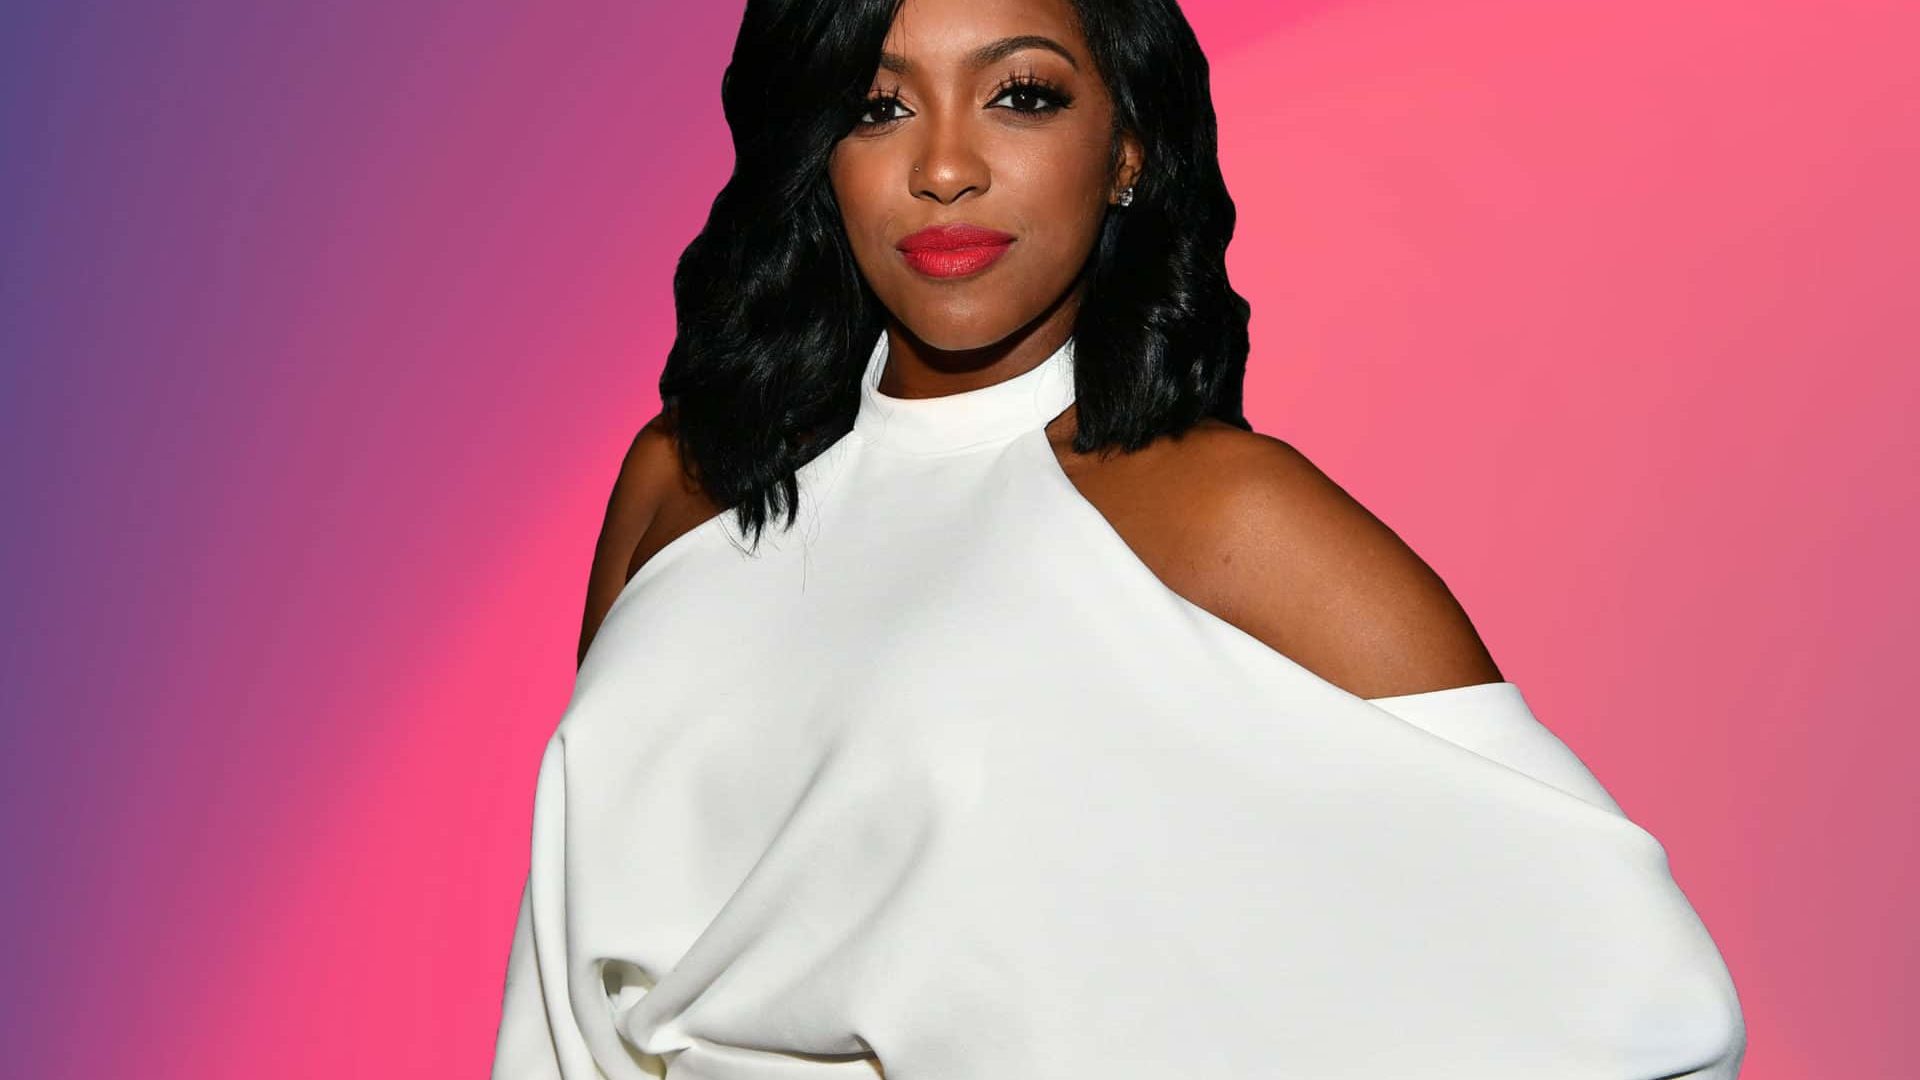 Porsha Williams Says 'Enough Is Enough' After Being Tear-Gassed At Peaceful Atlanta Protest